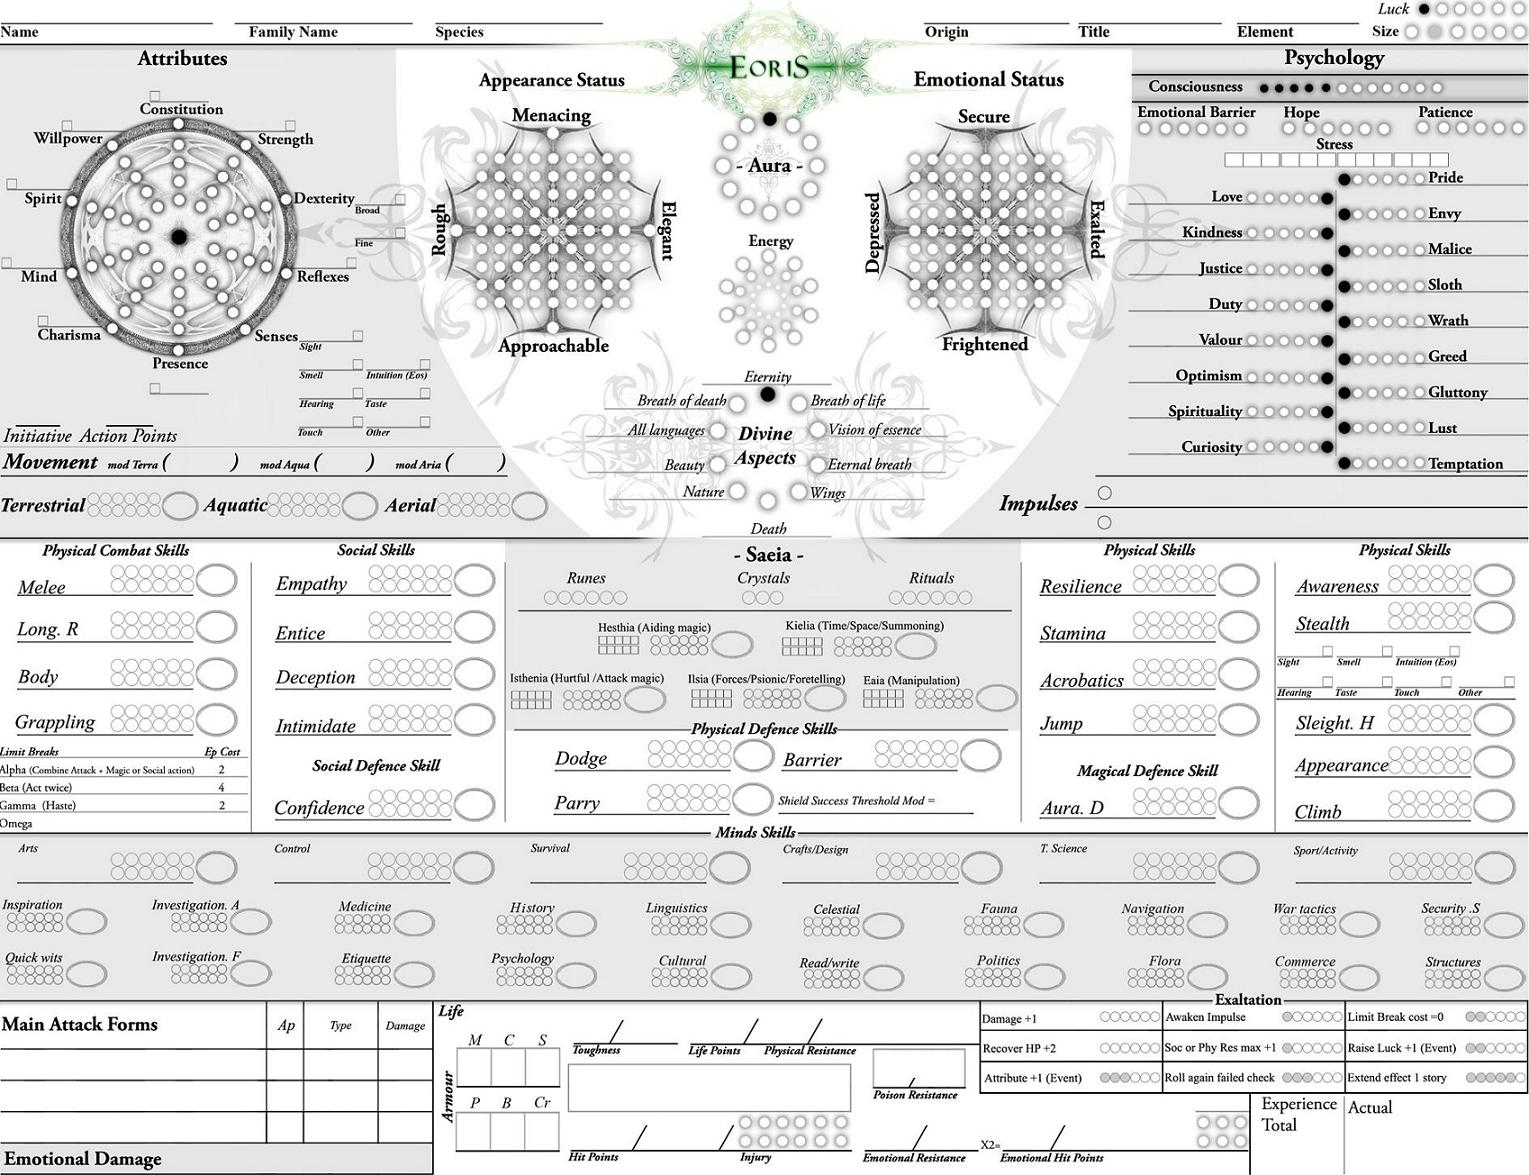 rolemaster character sheet pdf